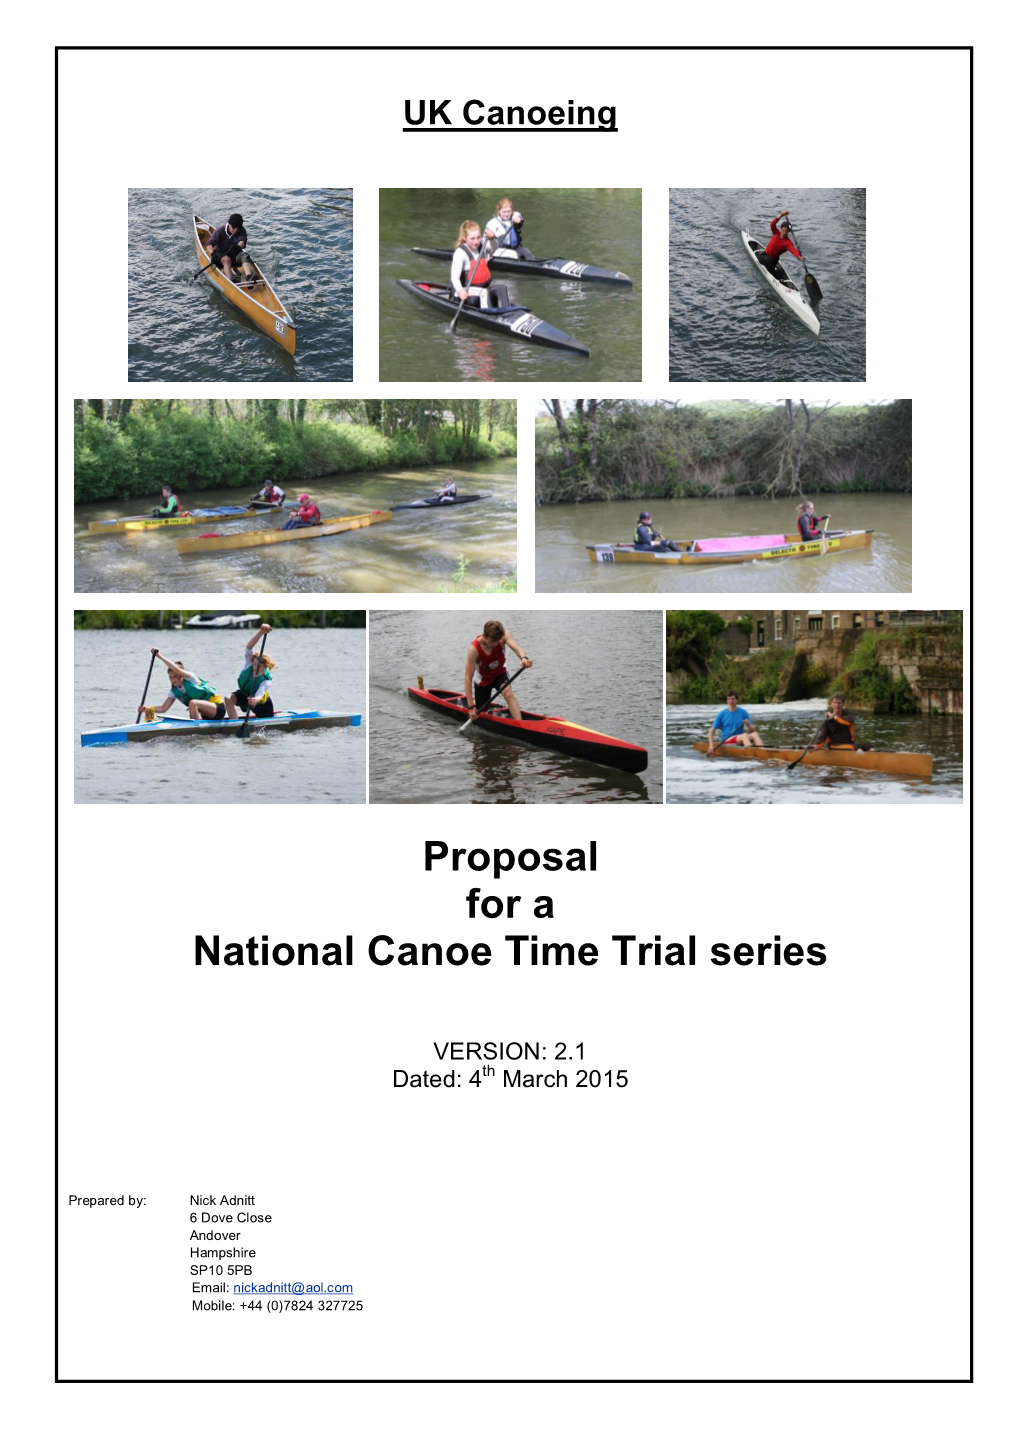 Proposal for a National Canoe Time Trial Series